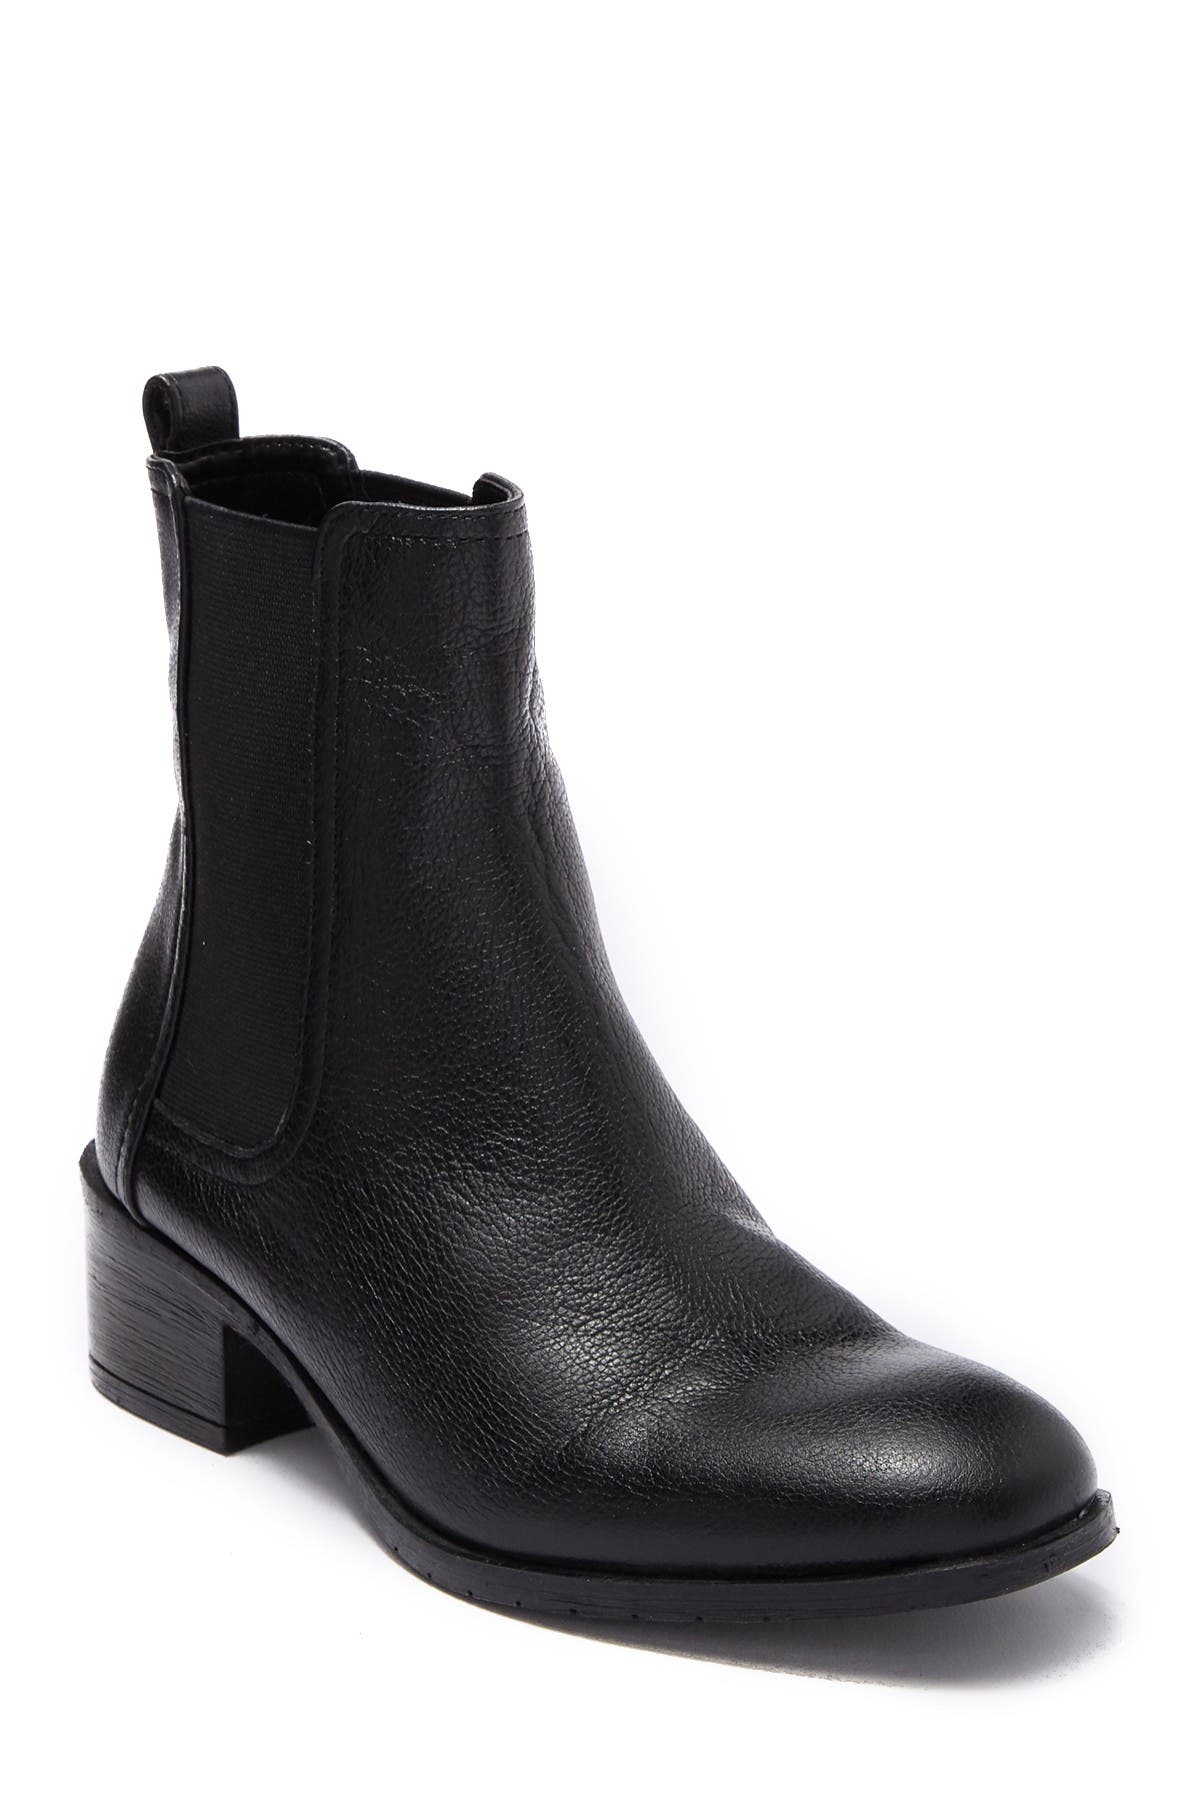 kenneth cole black leather boots